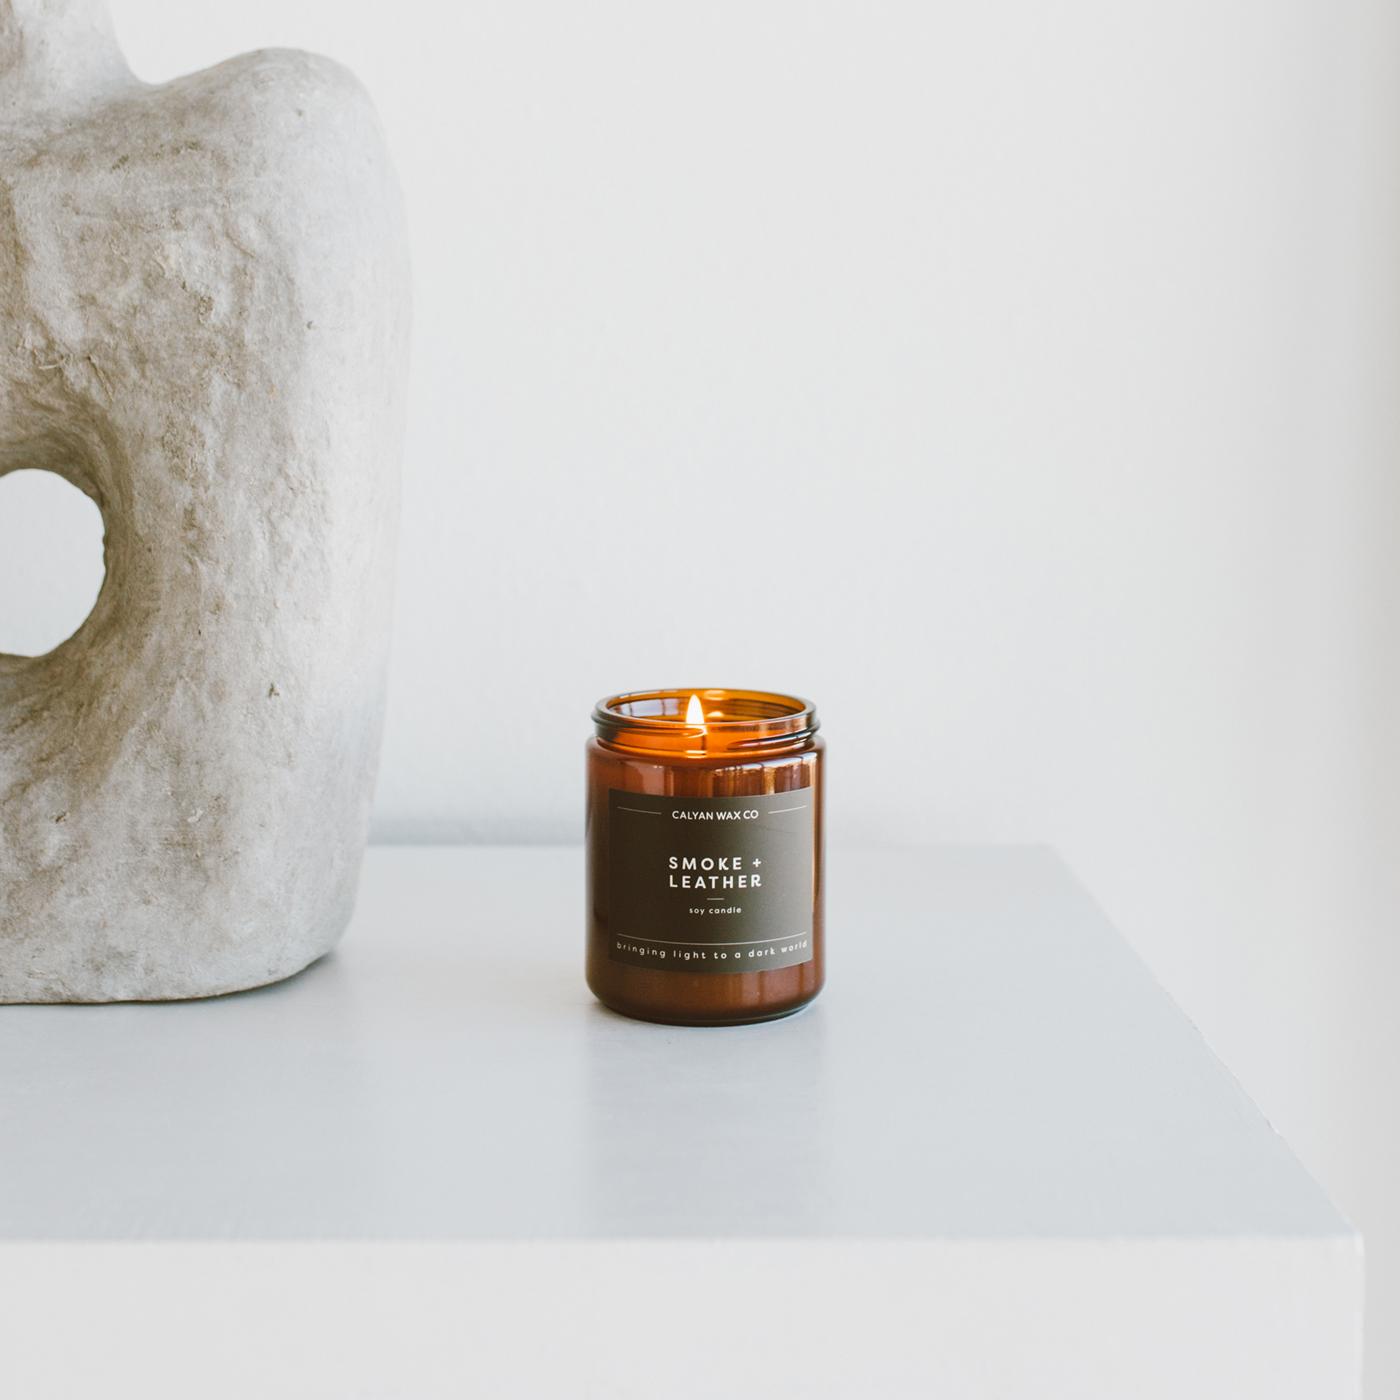 Calyan Wax Co. Smoke + Leather Scented Soy Candle; image 3 of 3